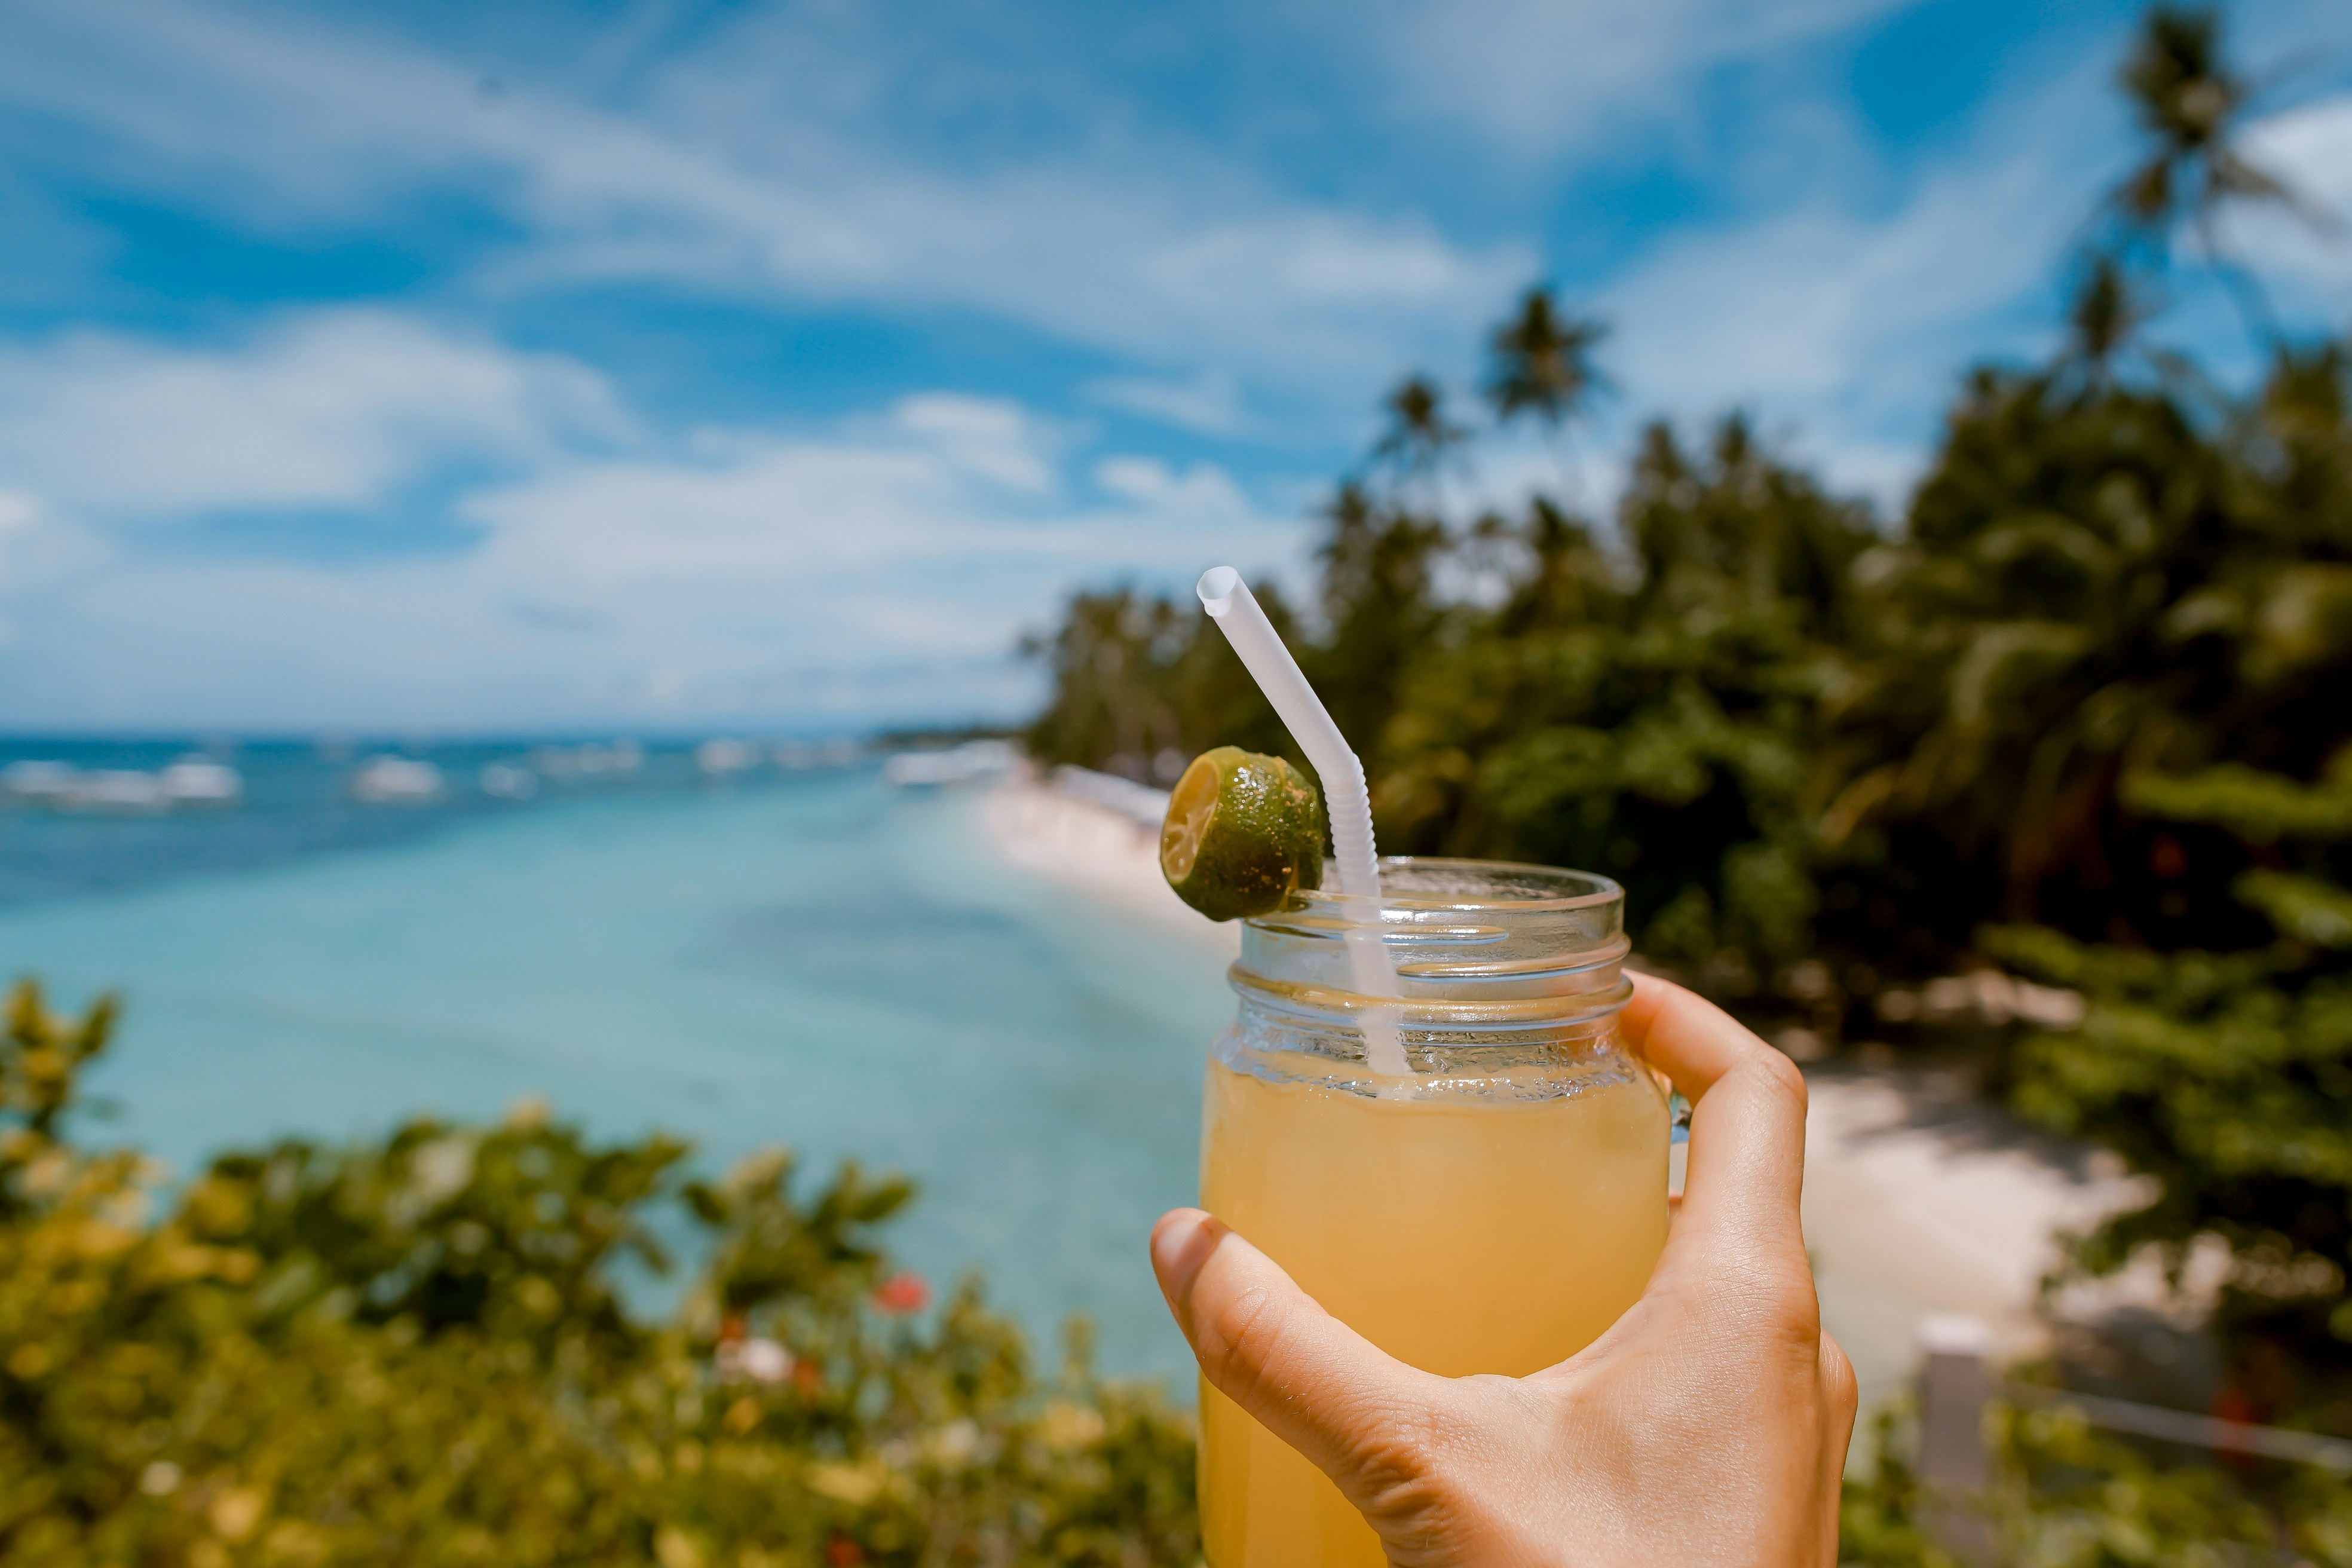 Sipping by the Shore: Beach Drinking Laws From Around The World